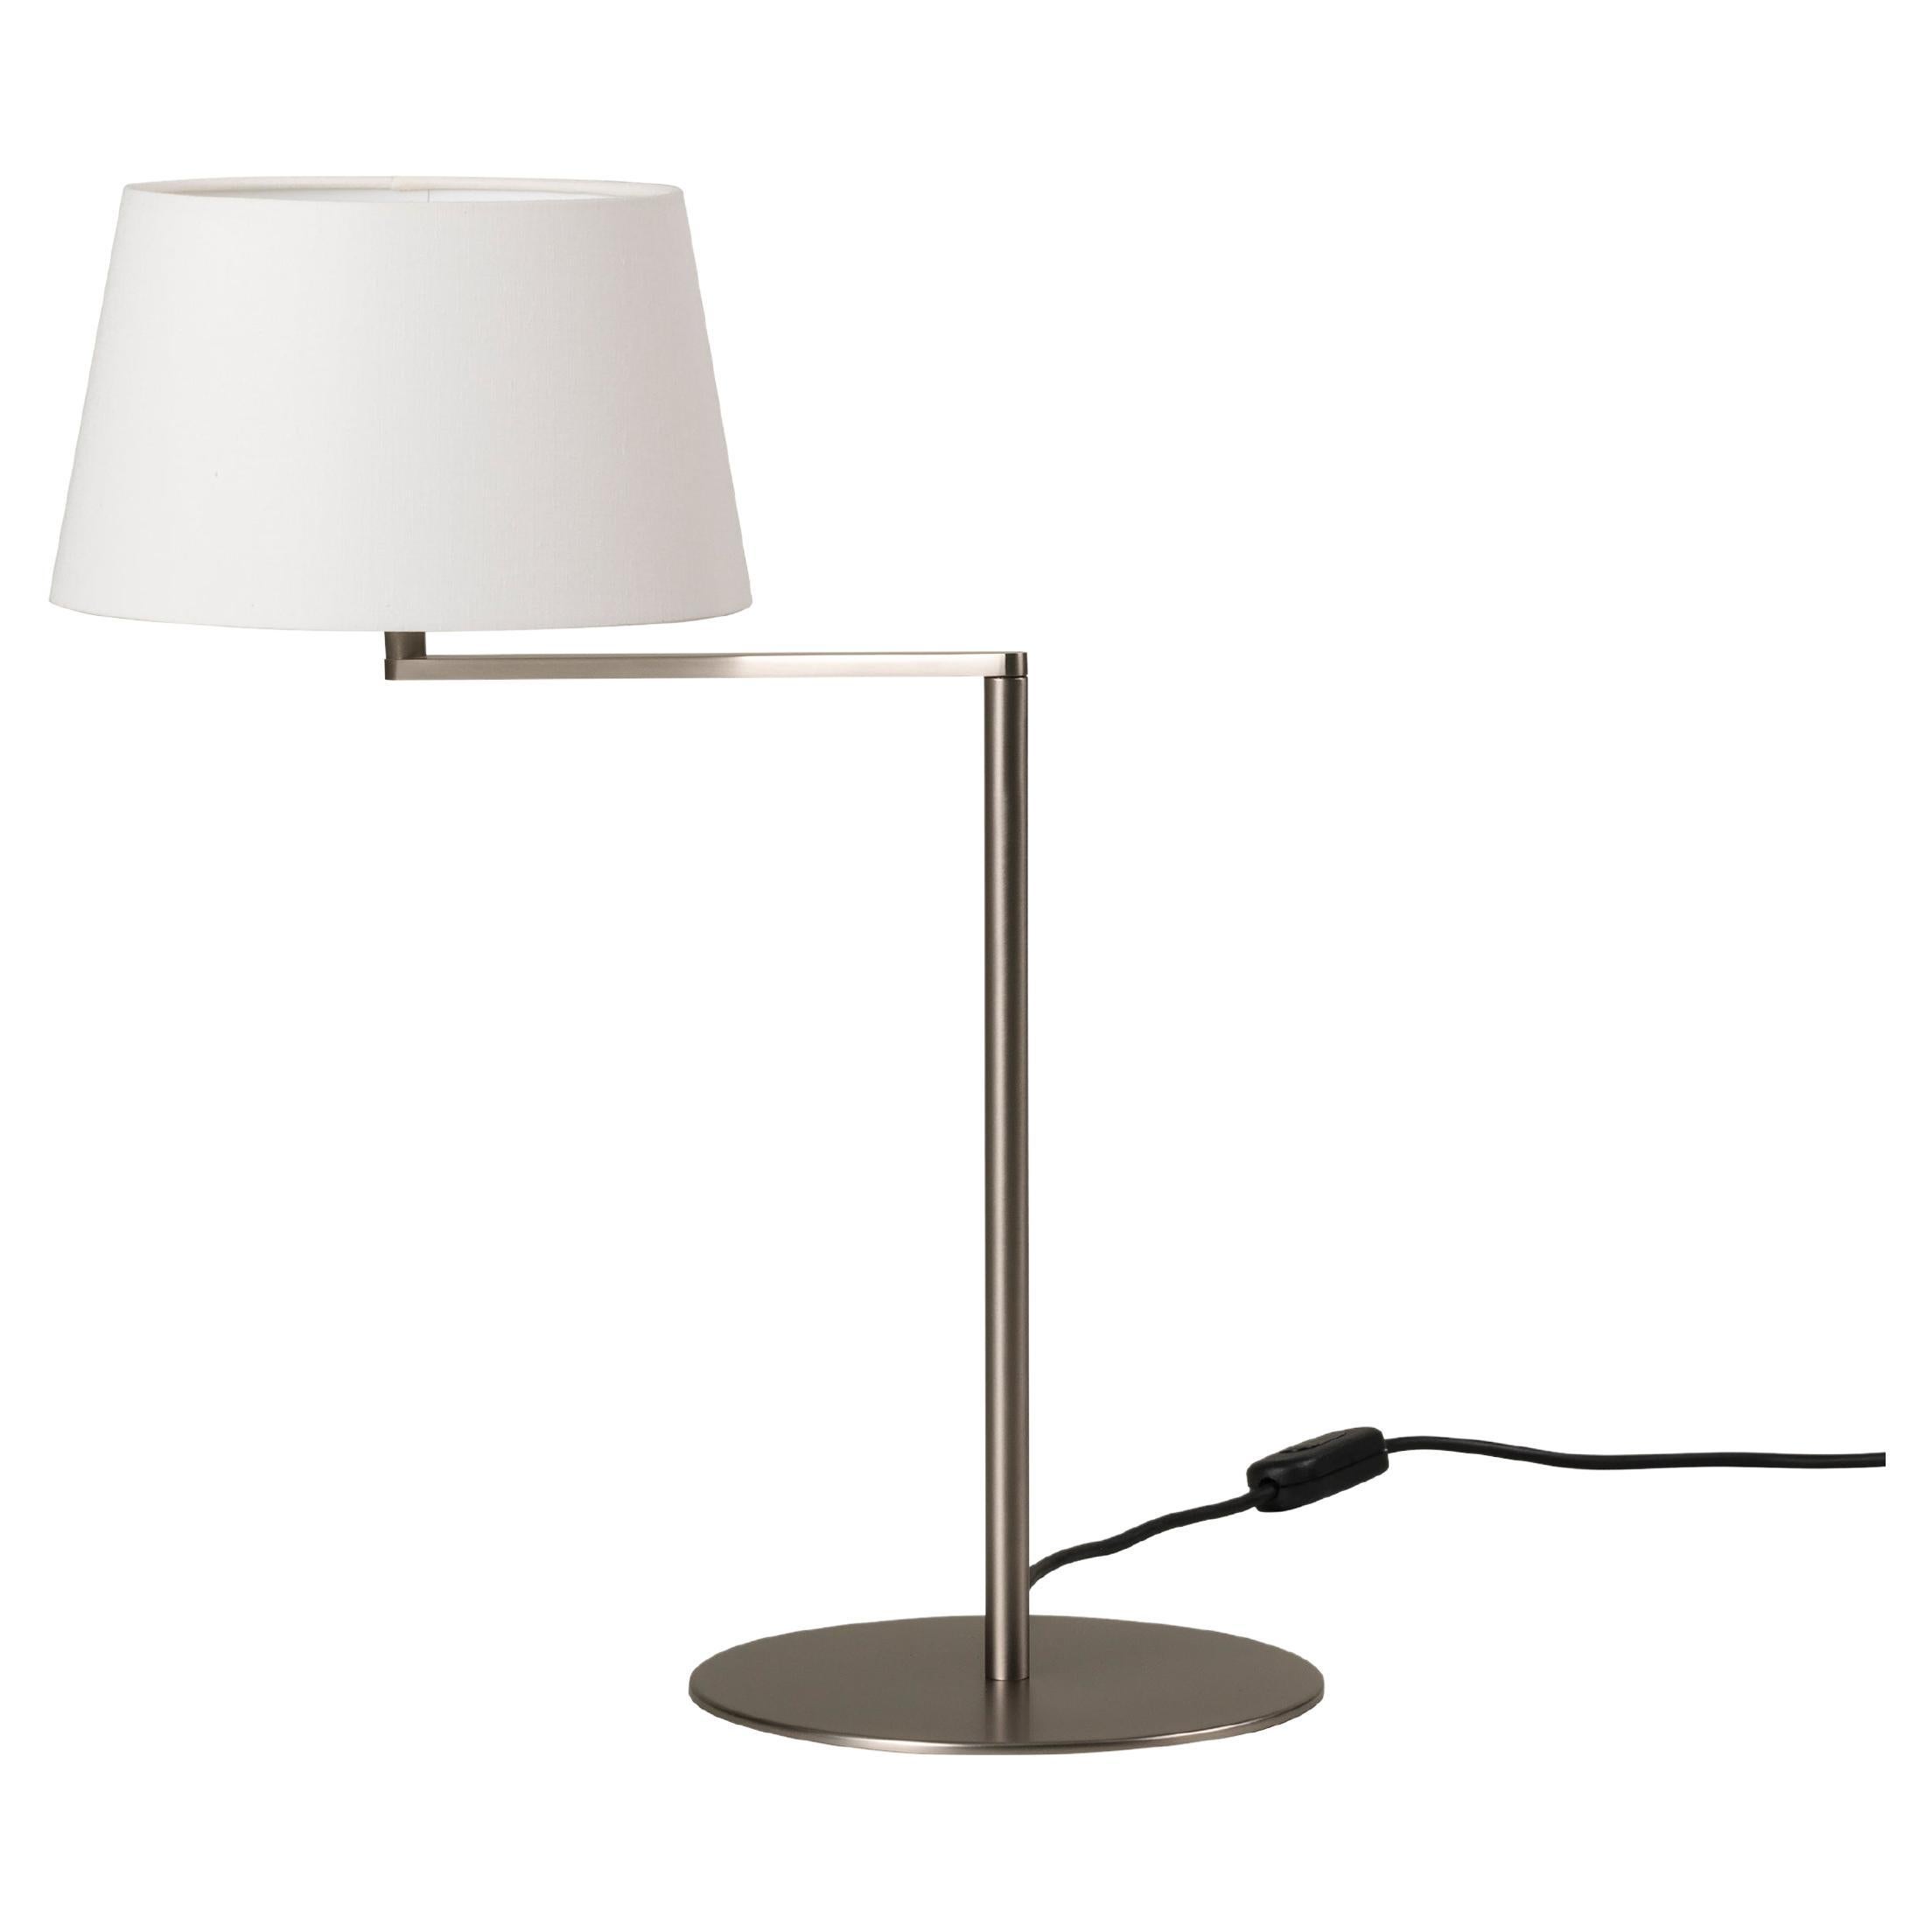 Americana Table Lamp by Miguel Milá